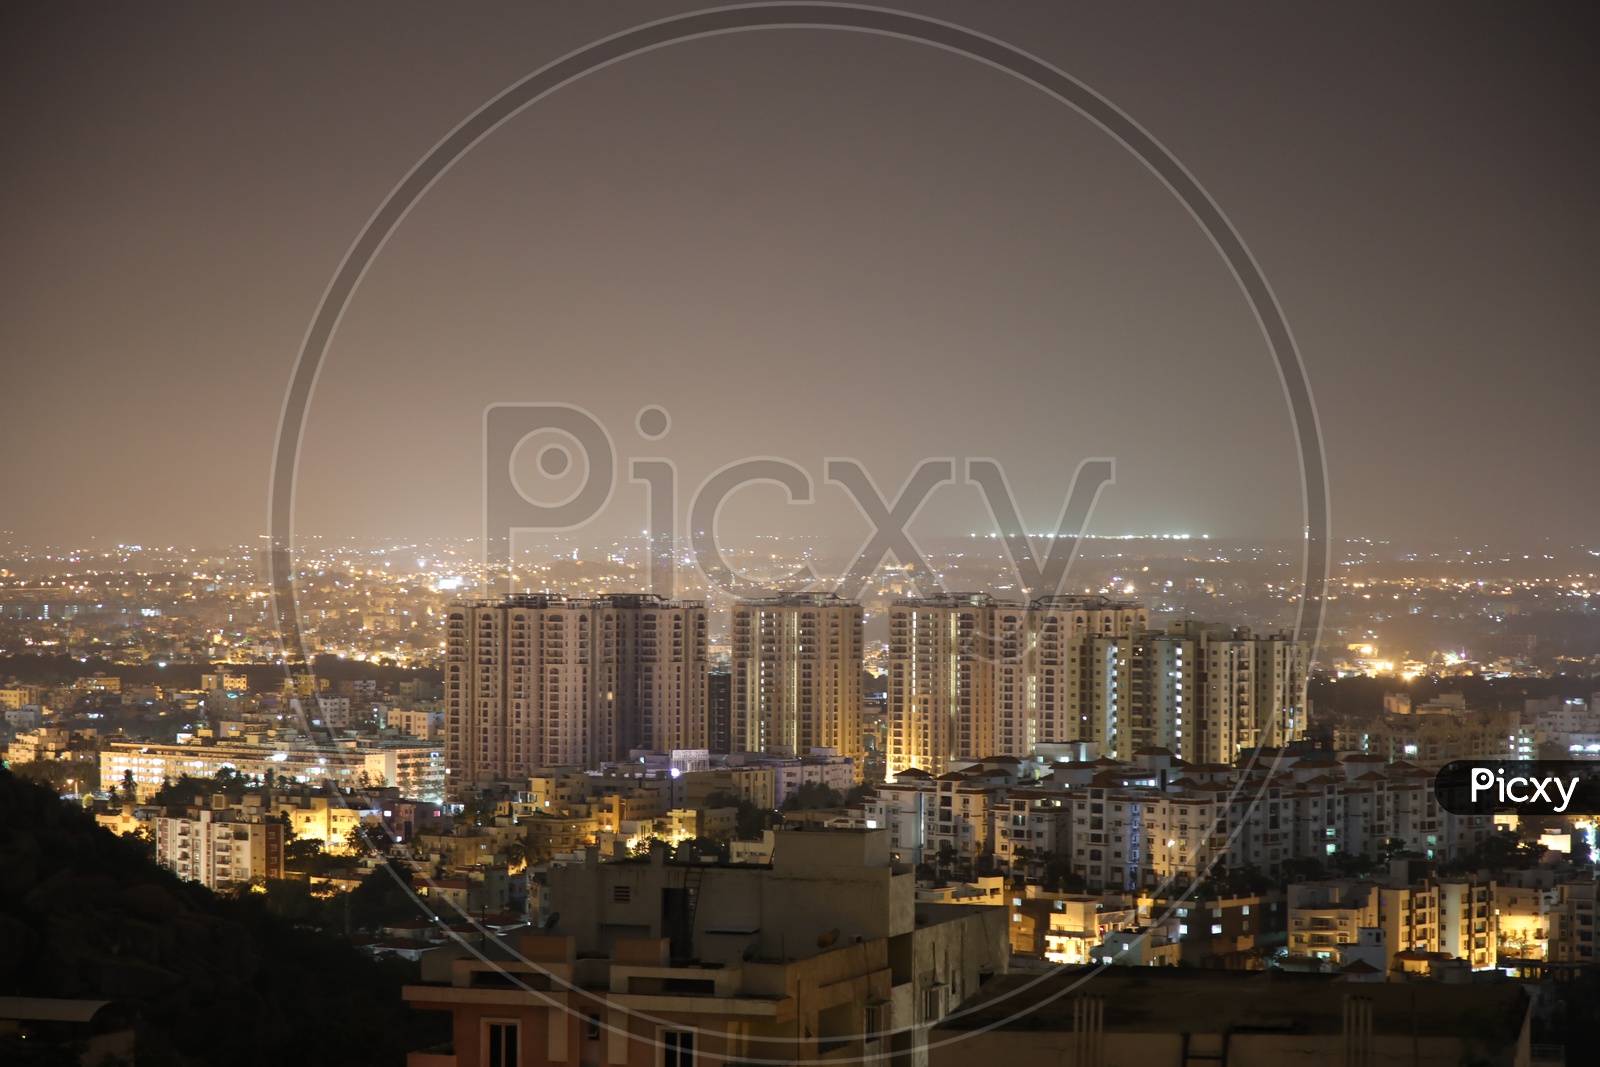 Night Scape Of City Lights With High rise  Buildings Sheikpet